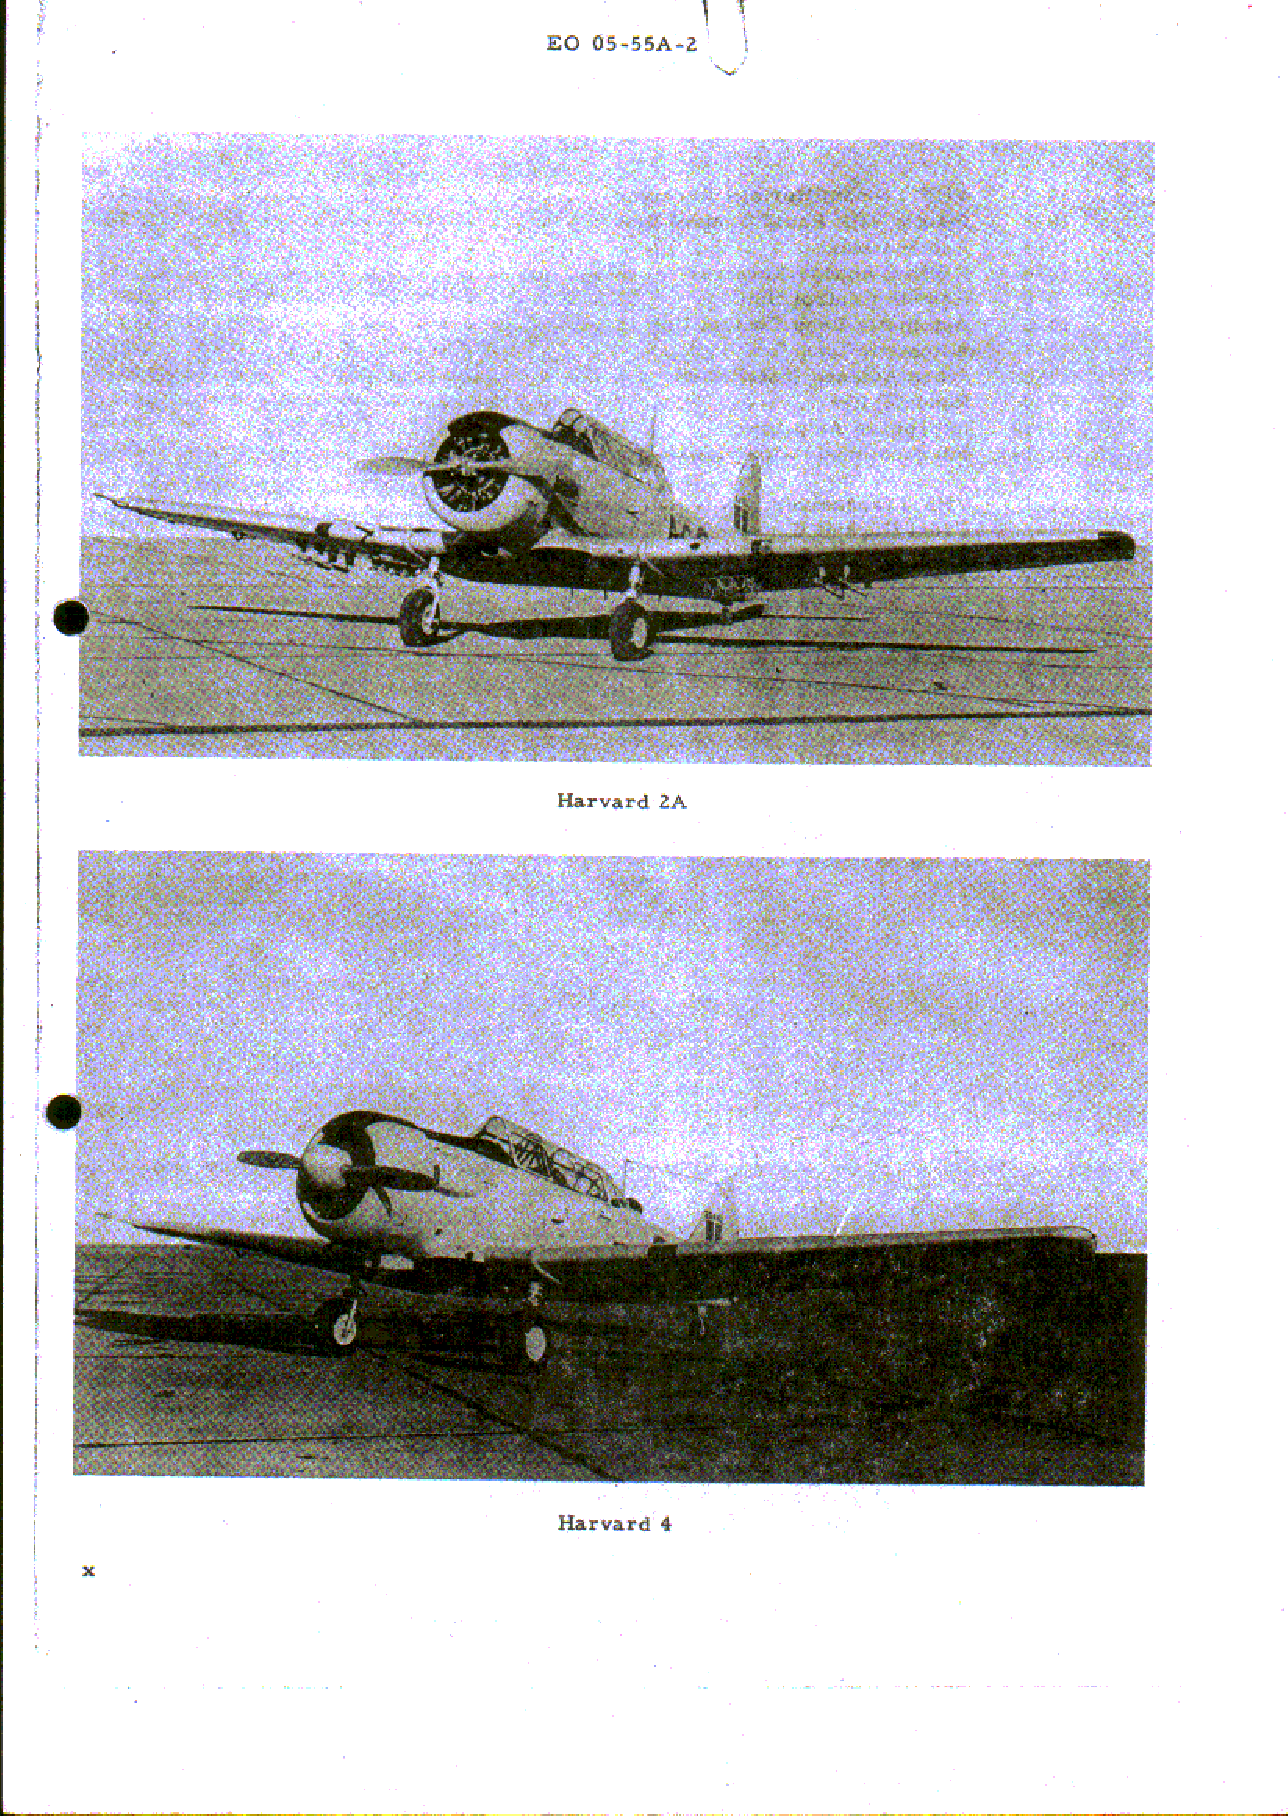 Sample page 12 from AirCorps Library document: Description and Maintenance Instructions for Harvard 2, 2A, and 4